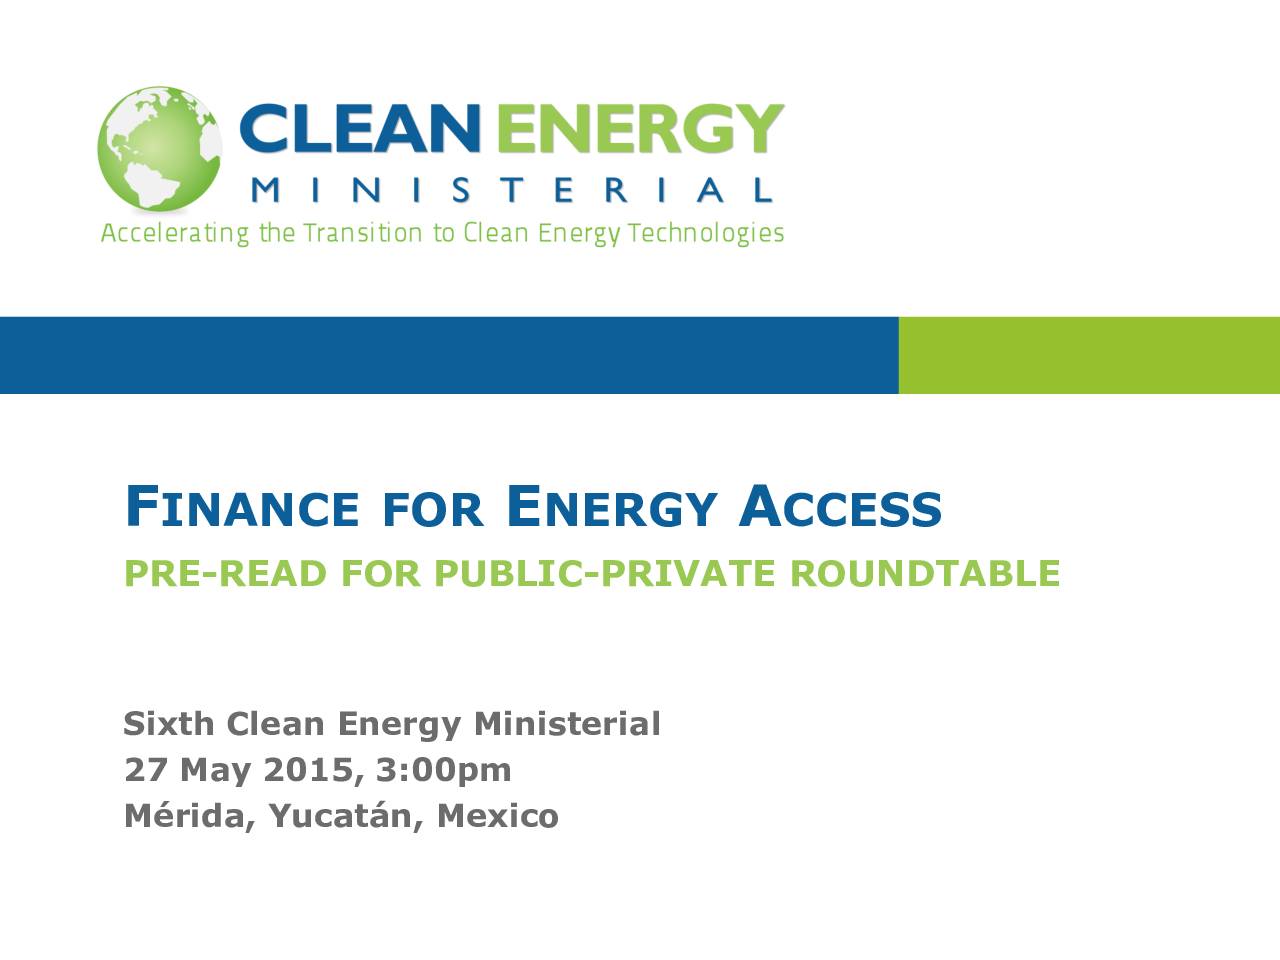 Finance for Energy Access: Pre-Read for Public-Private Roundtable